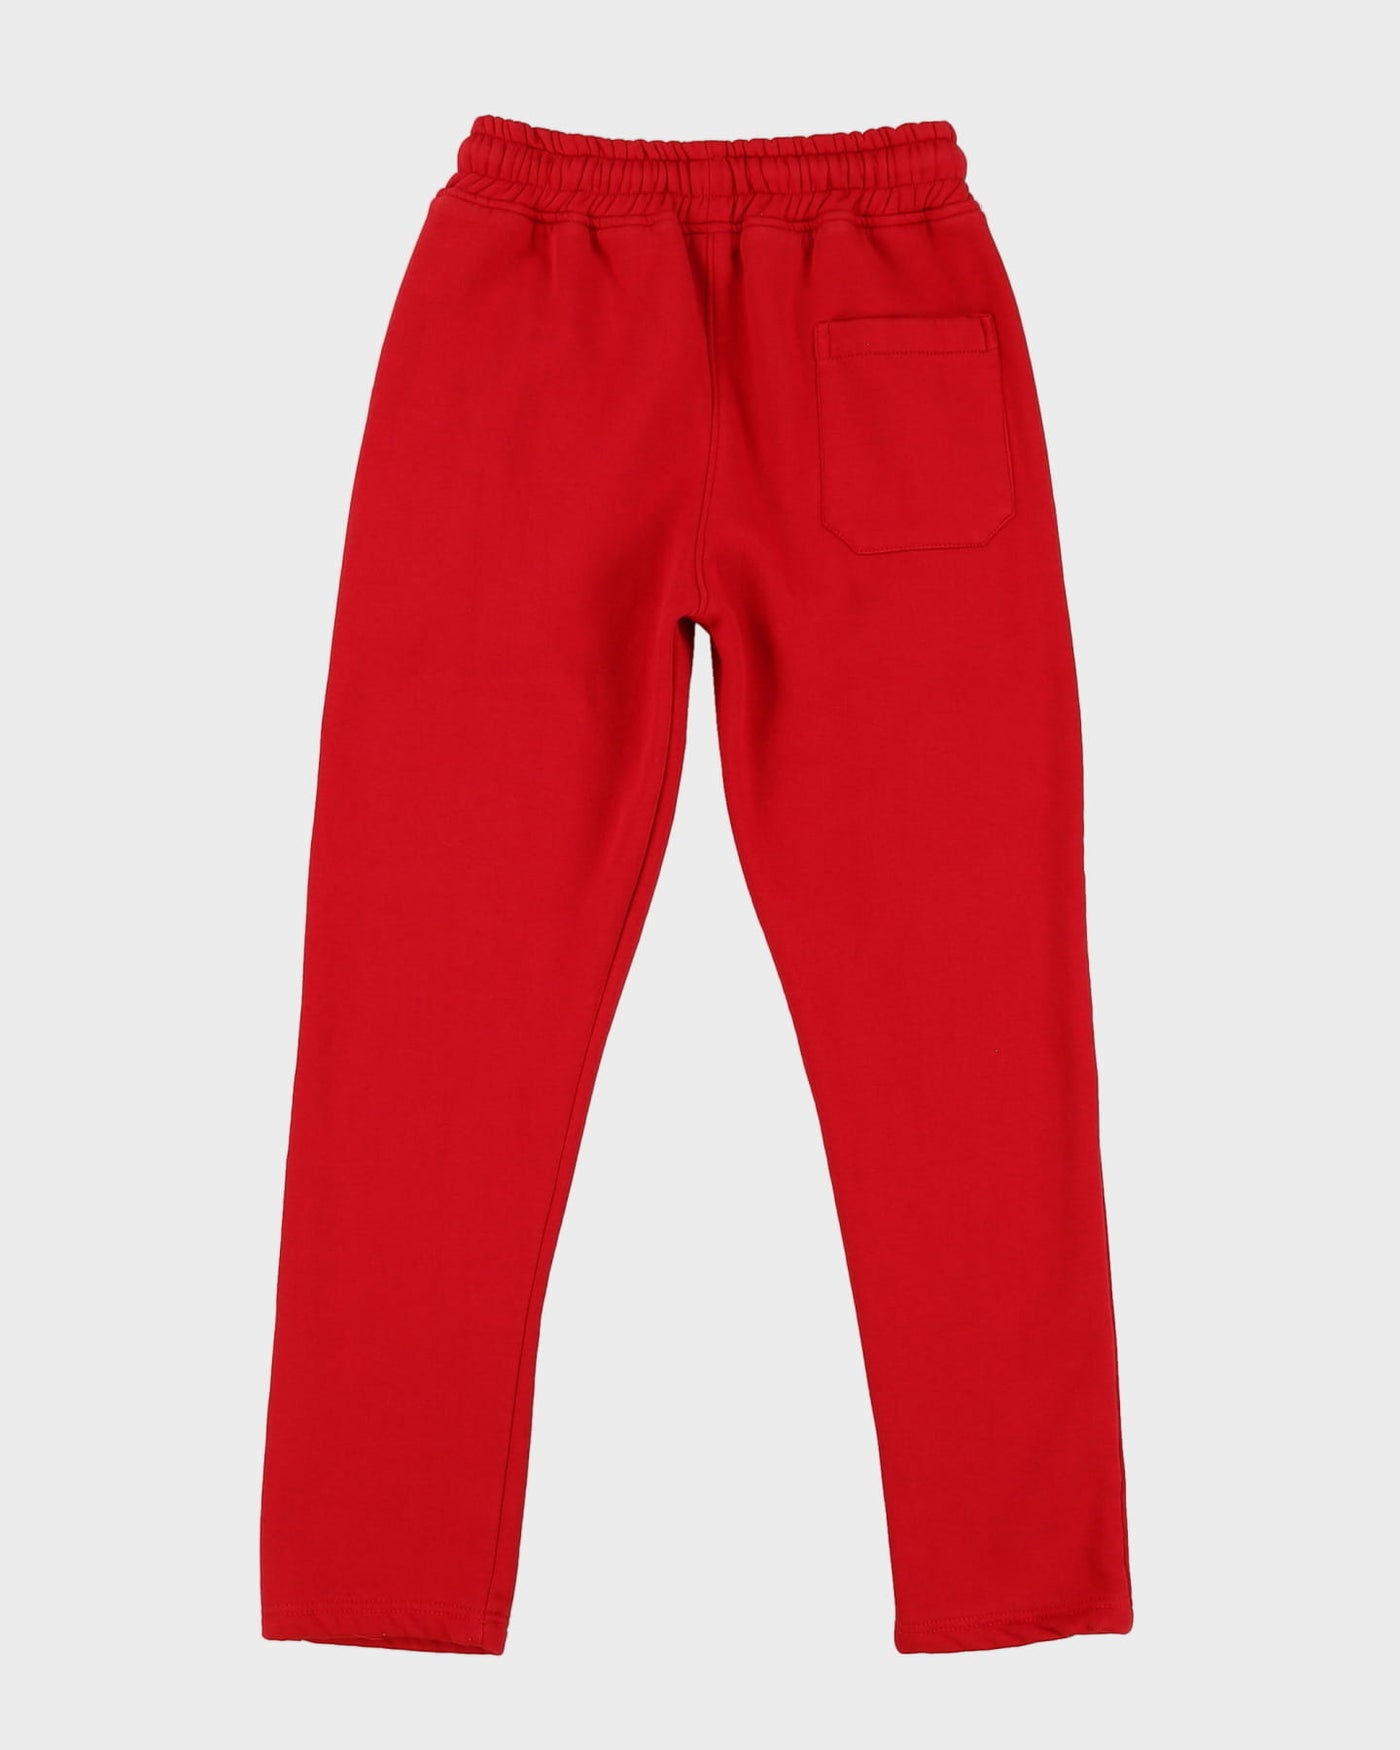 OVO Octobers Very Own Red Tracksuit Bottoms - M – Rokit